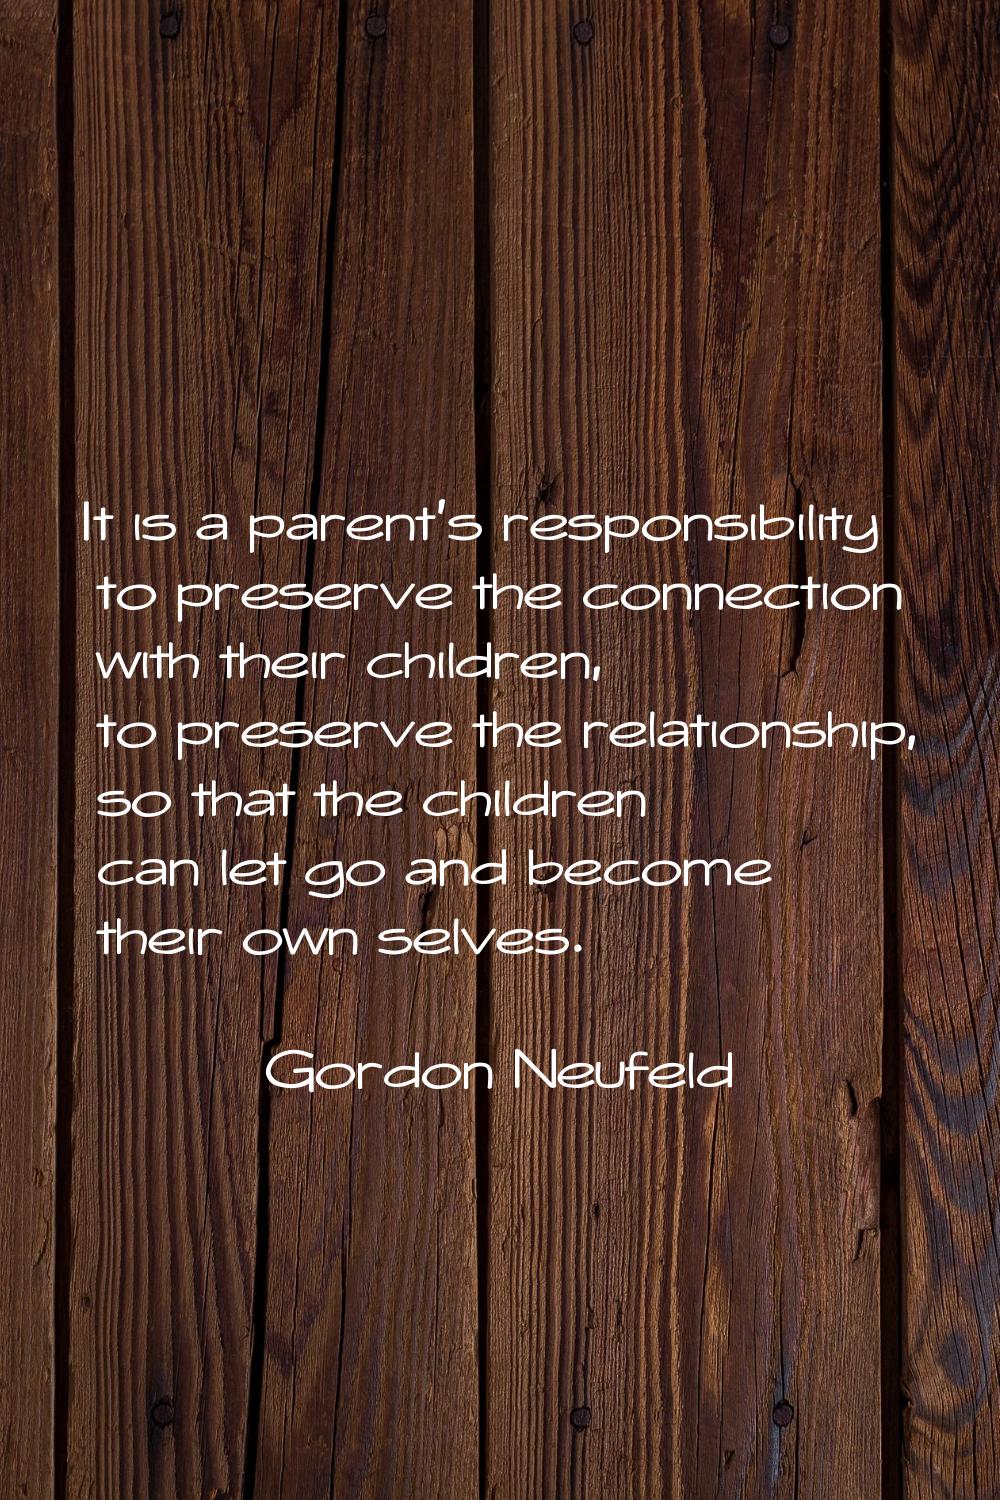 It is a parent's responsibility to preserve the connection with their children, to preserve the rel